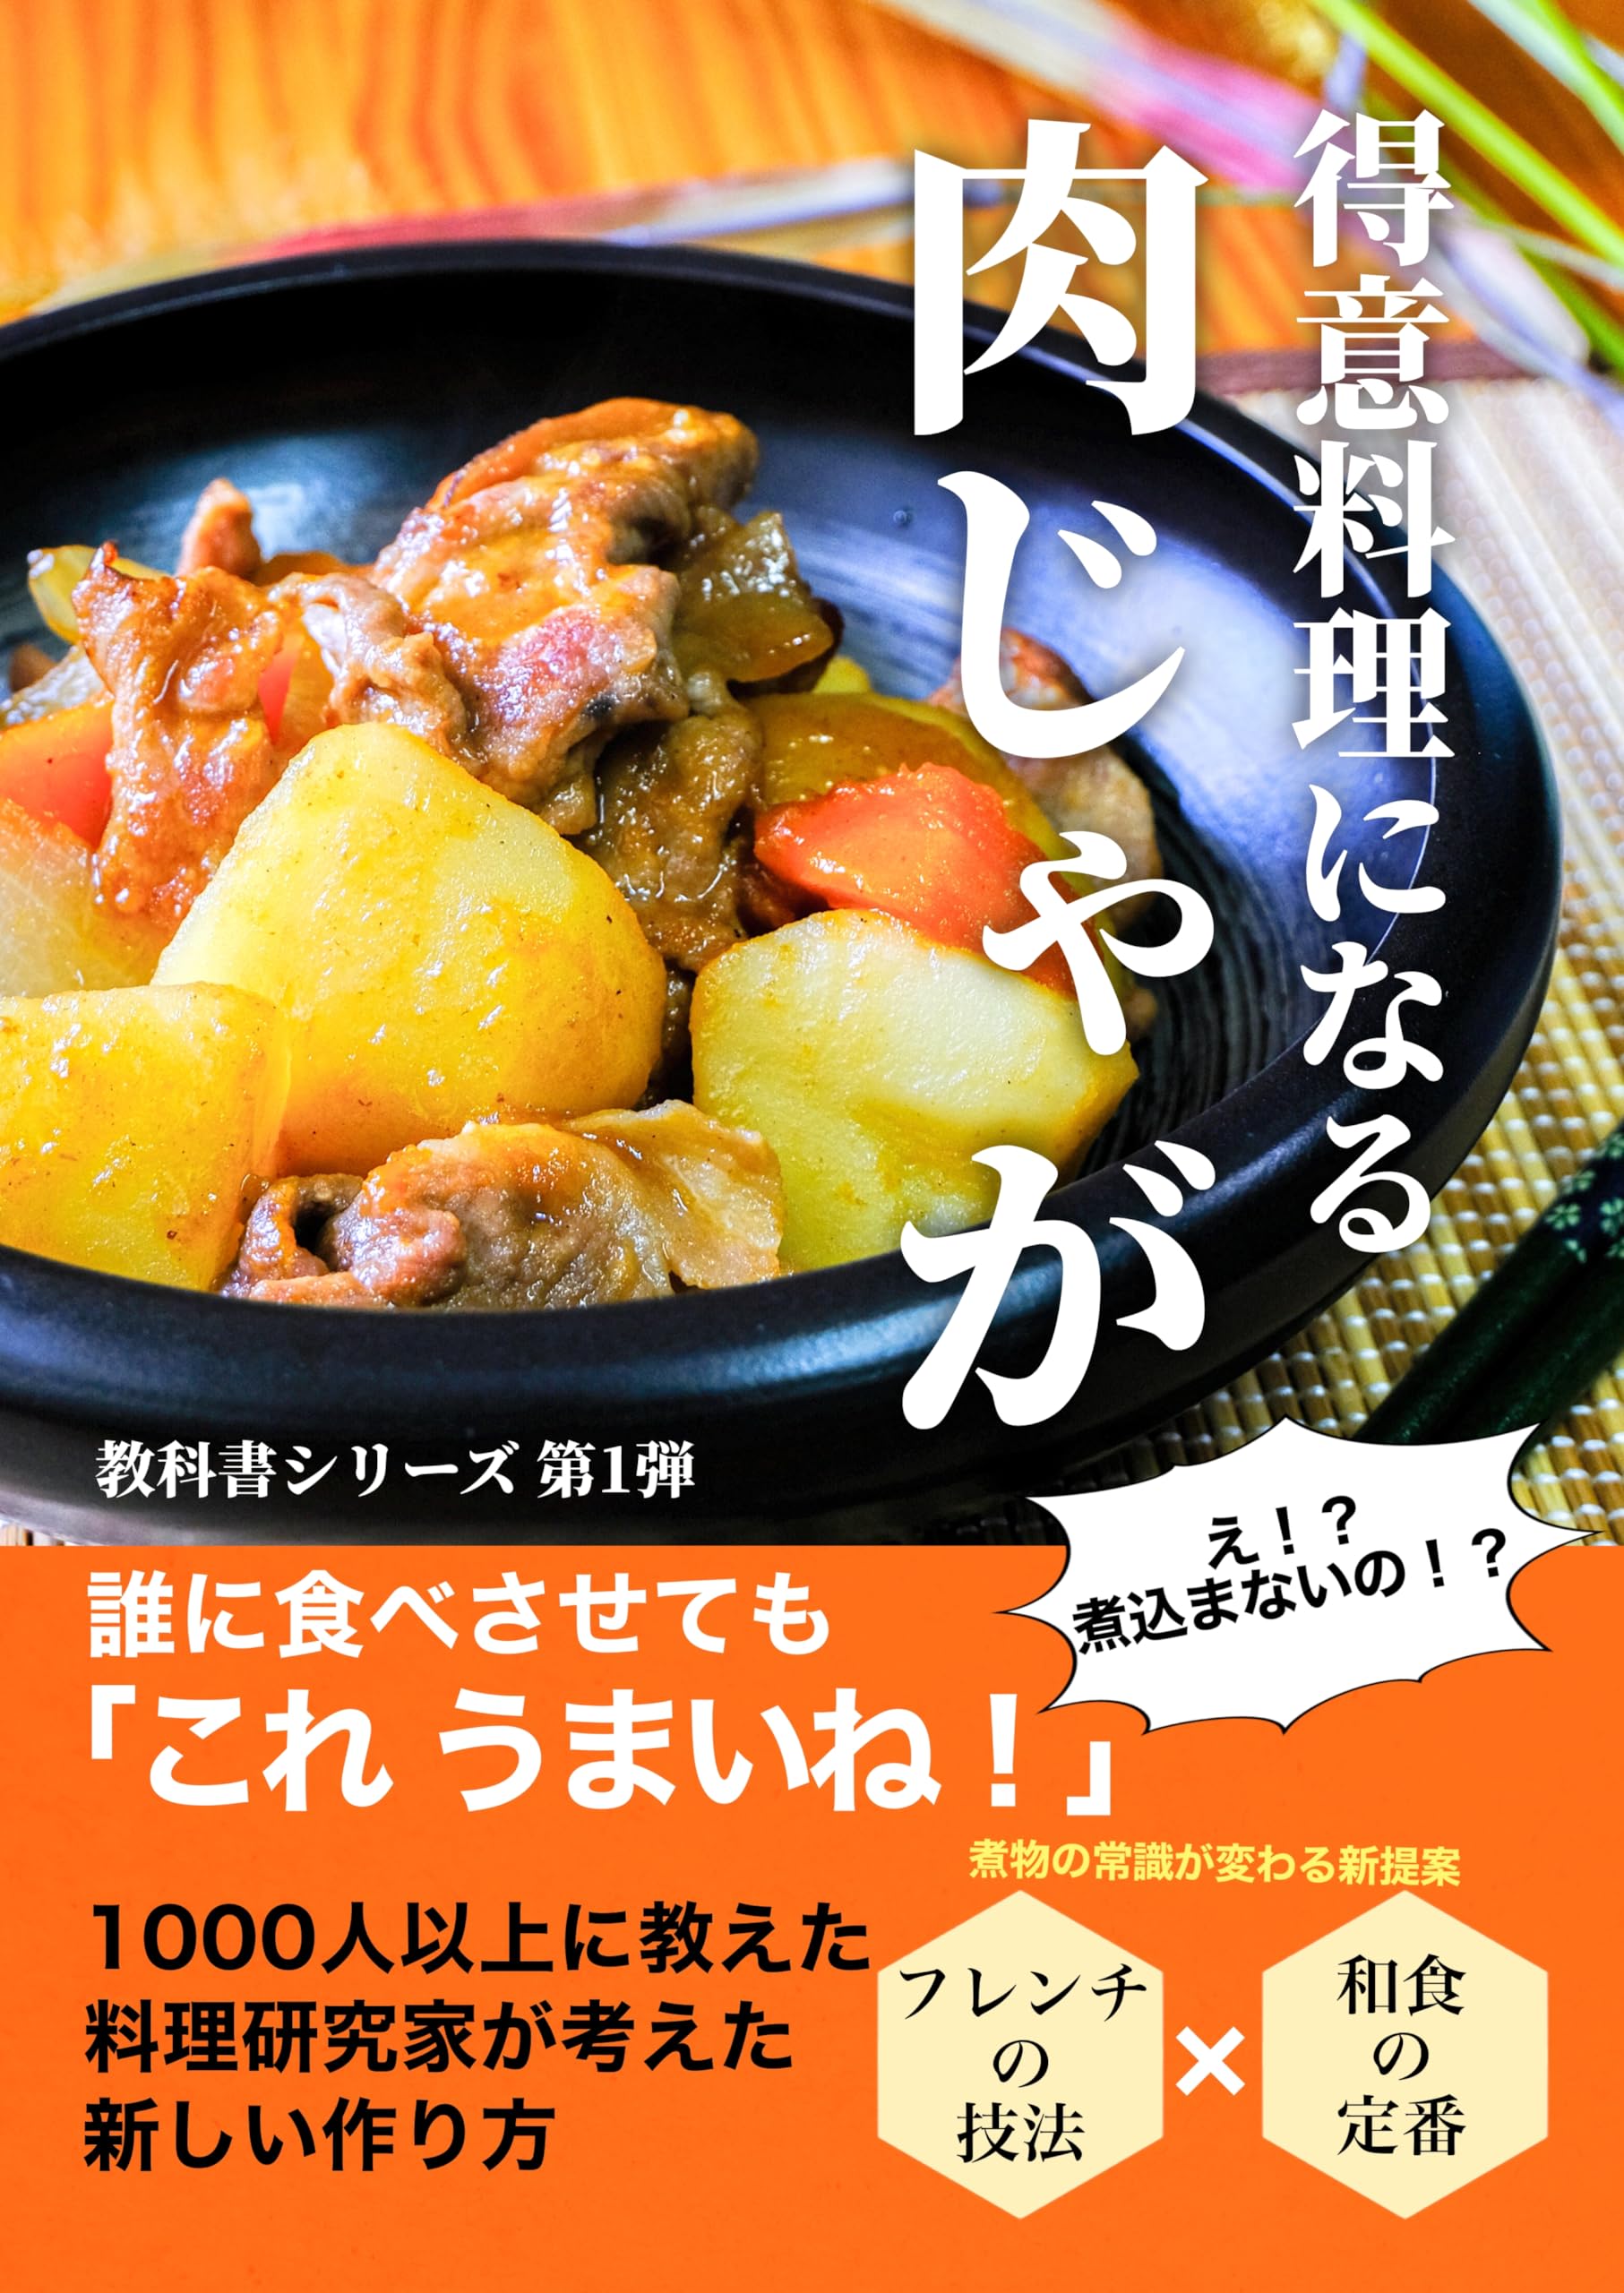 basic Japanese food nikujaga textbook: Cooking instructor taught over 1000 people Techniques to make vegetables delicious kyoukasyo (Japanese Edition)